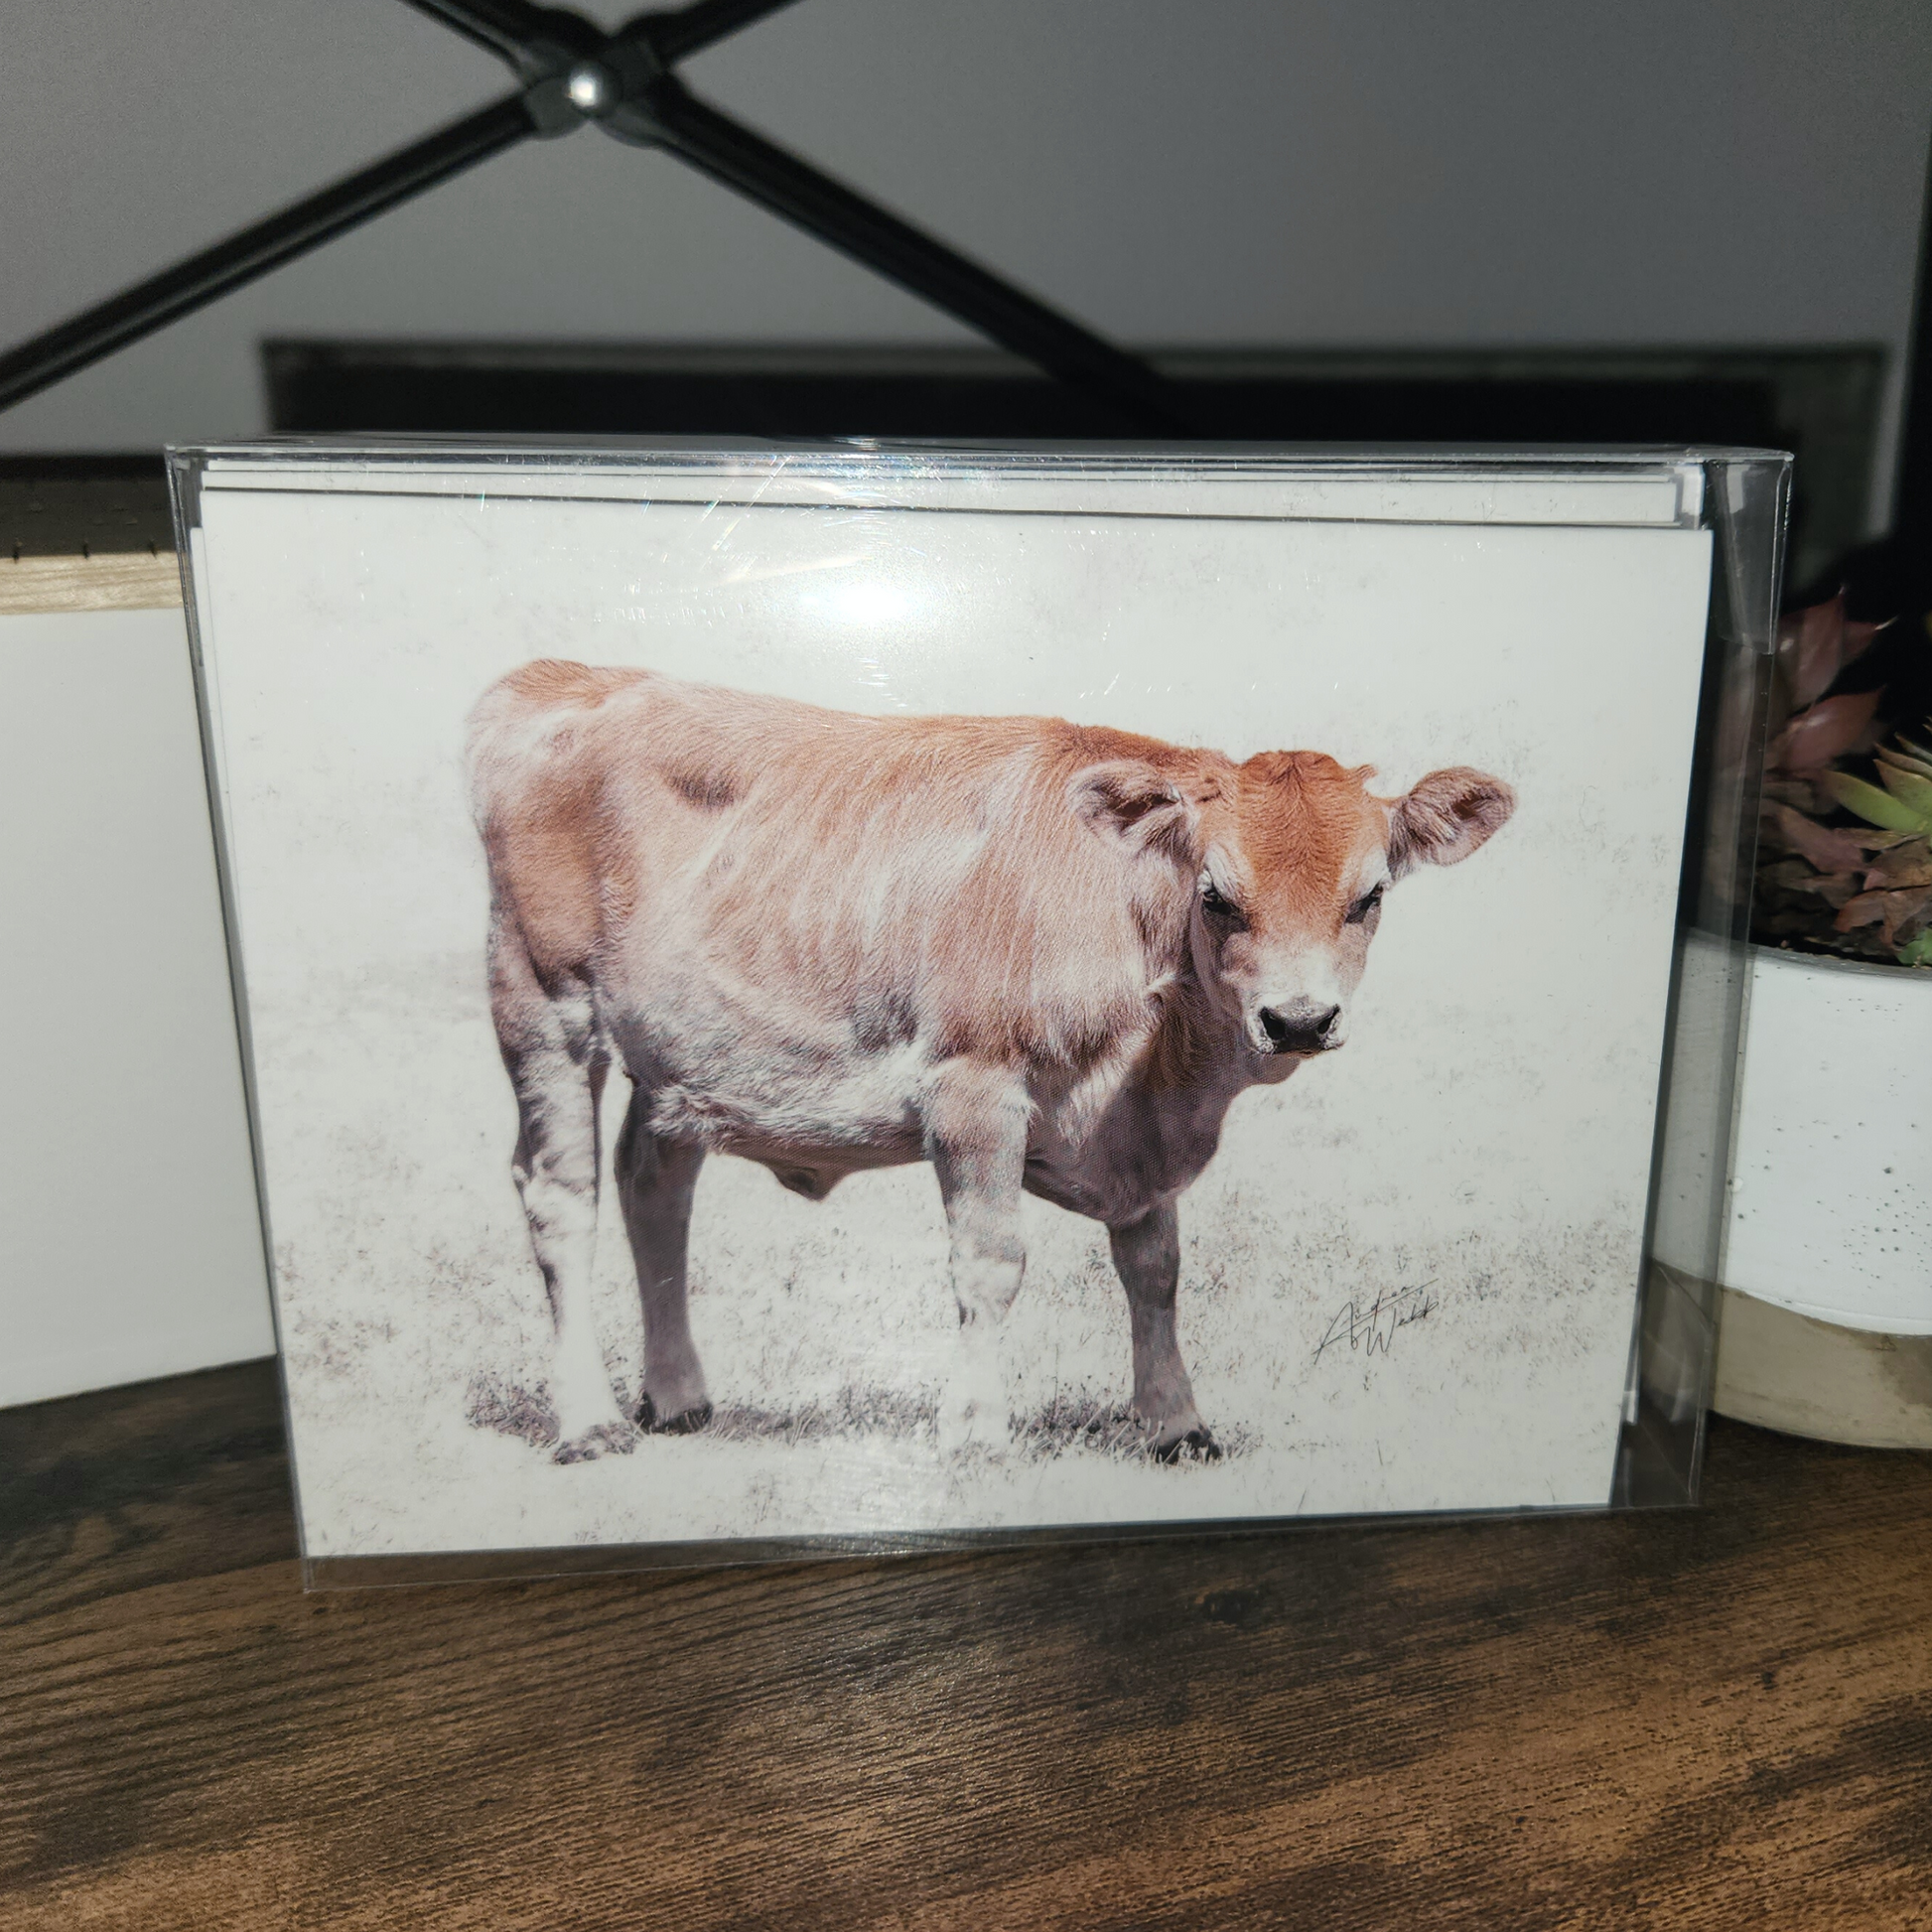 This product is a Jersey heifer calf on a folded notecard greeting card and is a set of 10. This Jersey heifer calf is printed on 14 pt. cardstock matte paper..